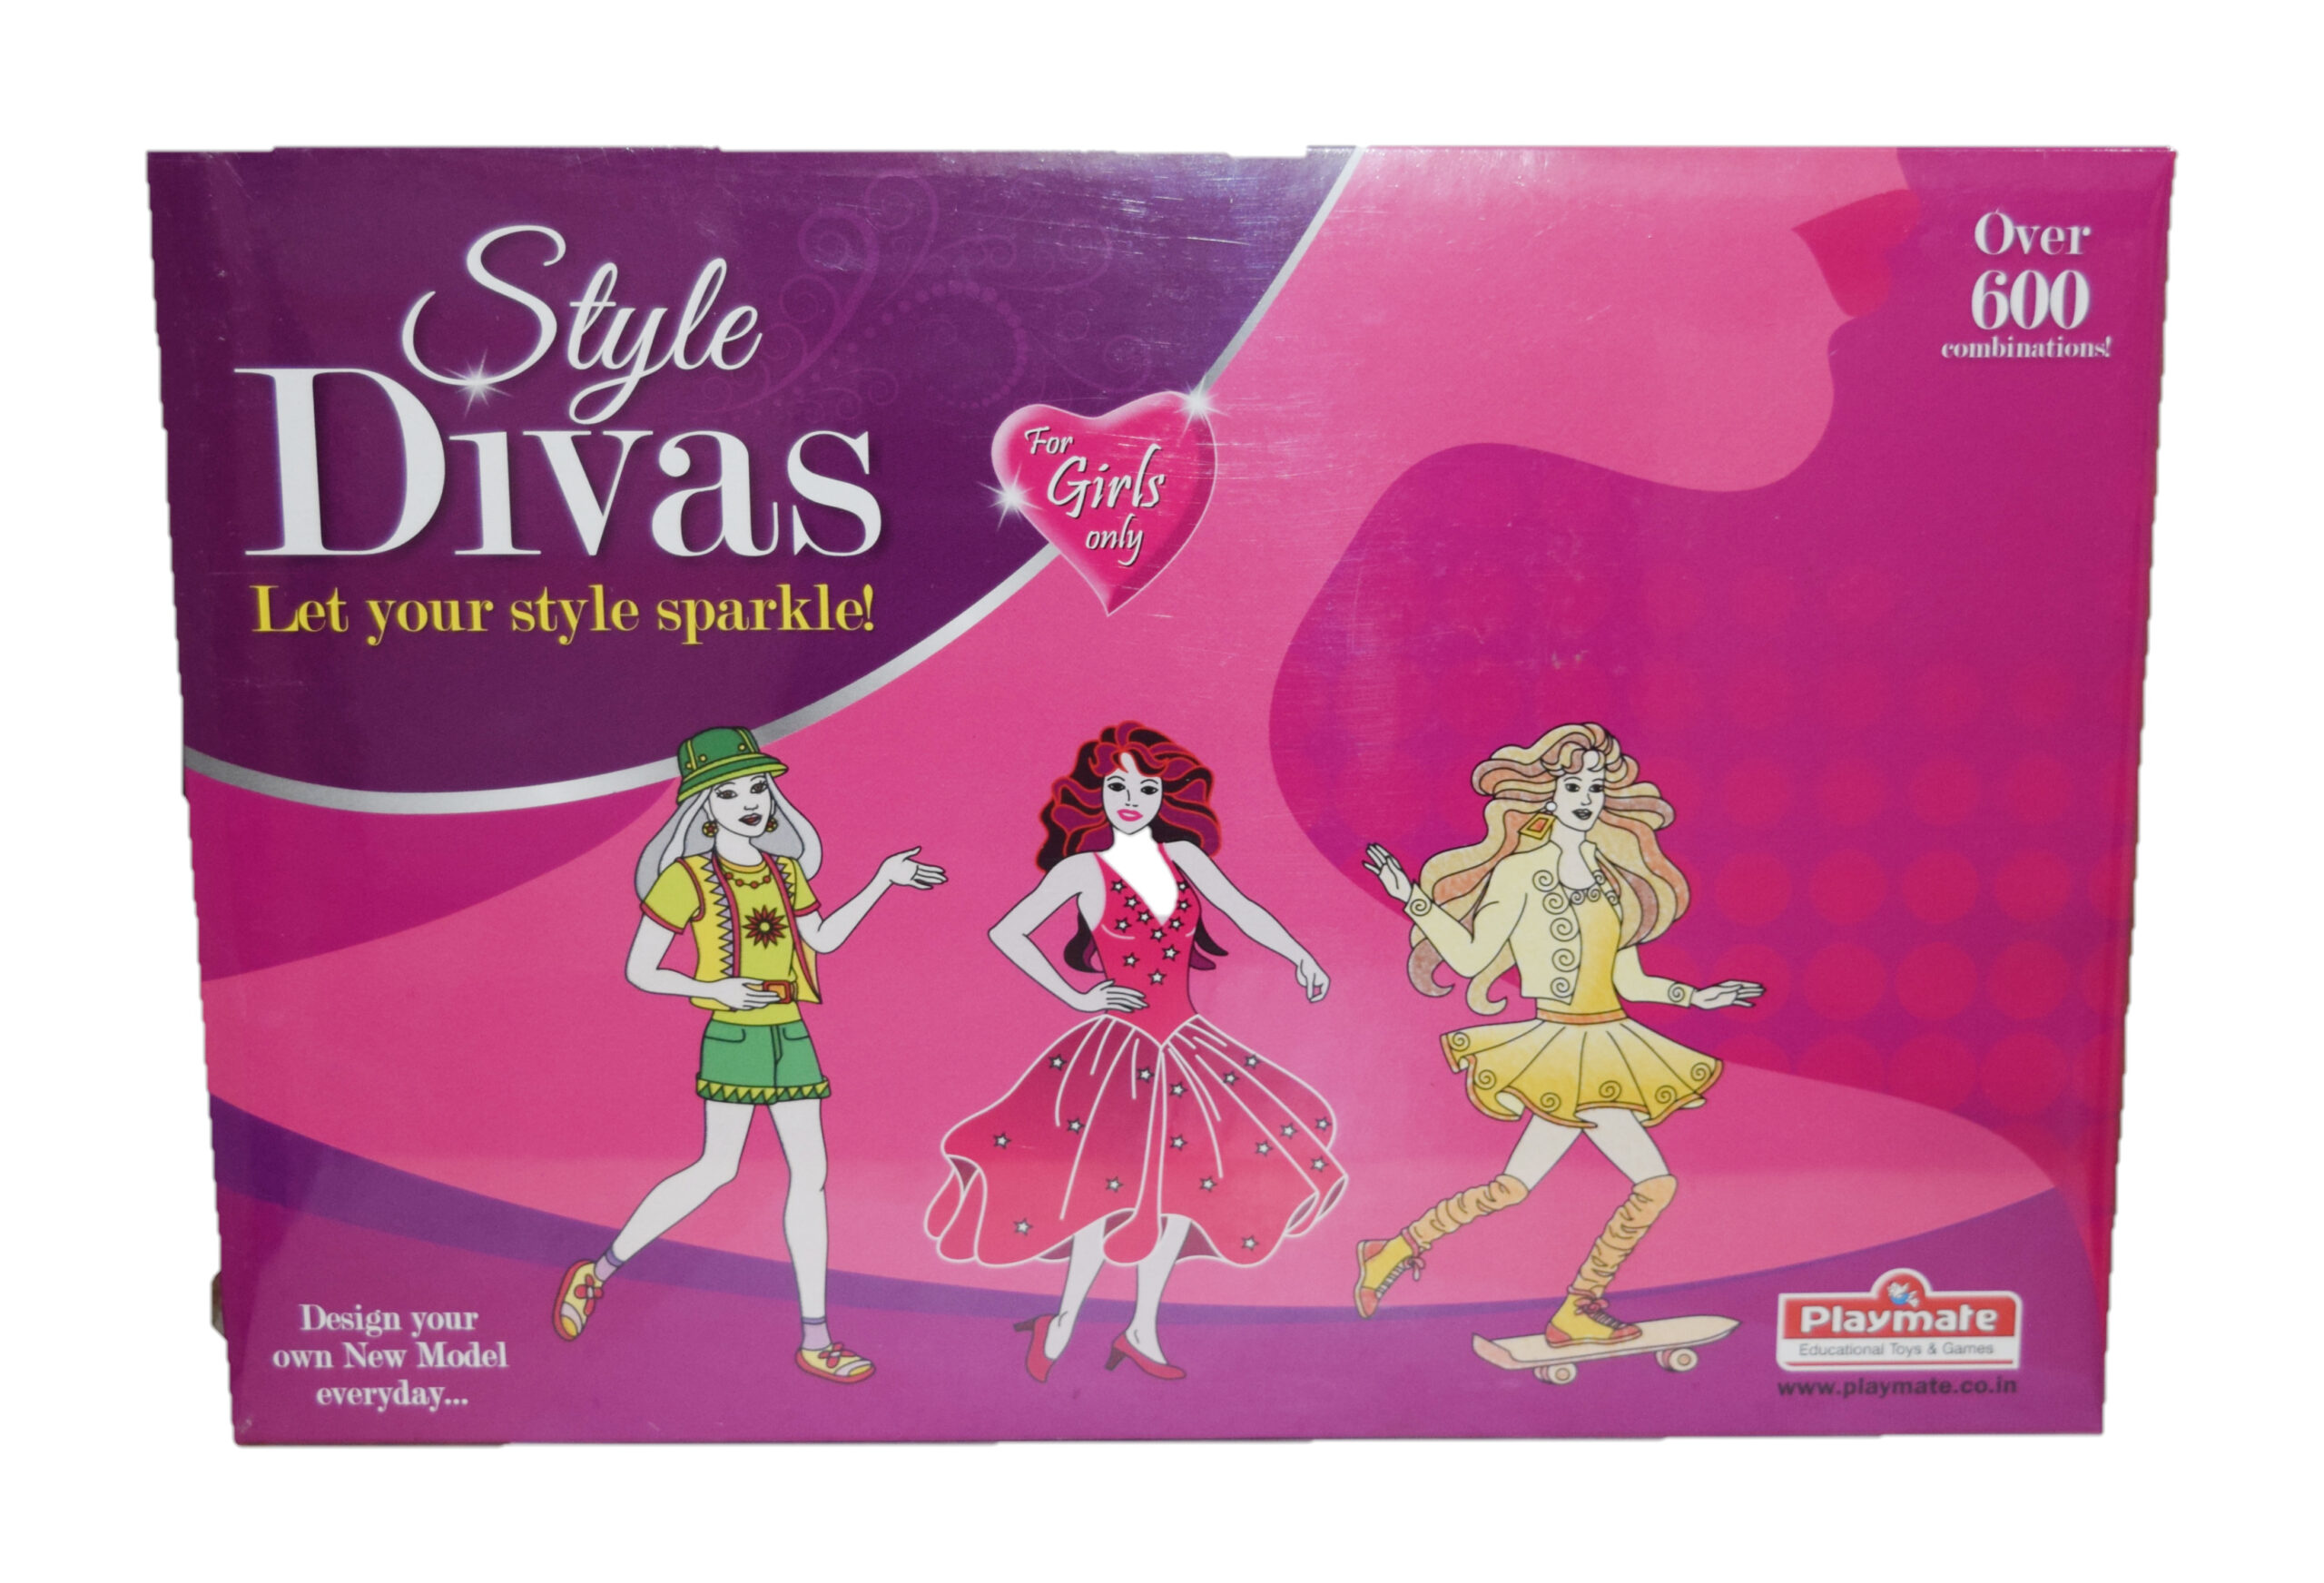 PLAYMATE STYLE DIVAS LET YOUR STYLE SPARKLE DESIGN YOUR OWN NEW MODEL EVERYDAY GIFT FOR GIRLS